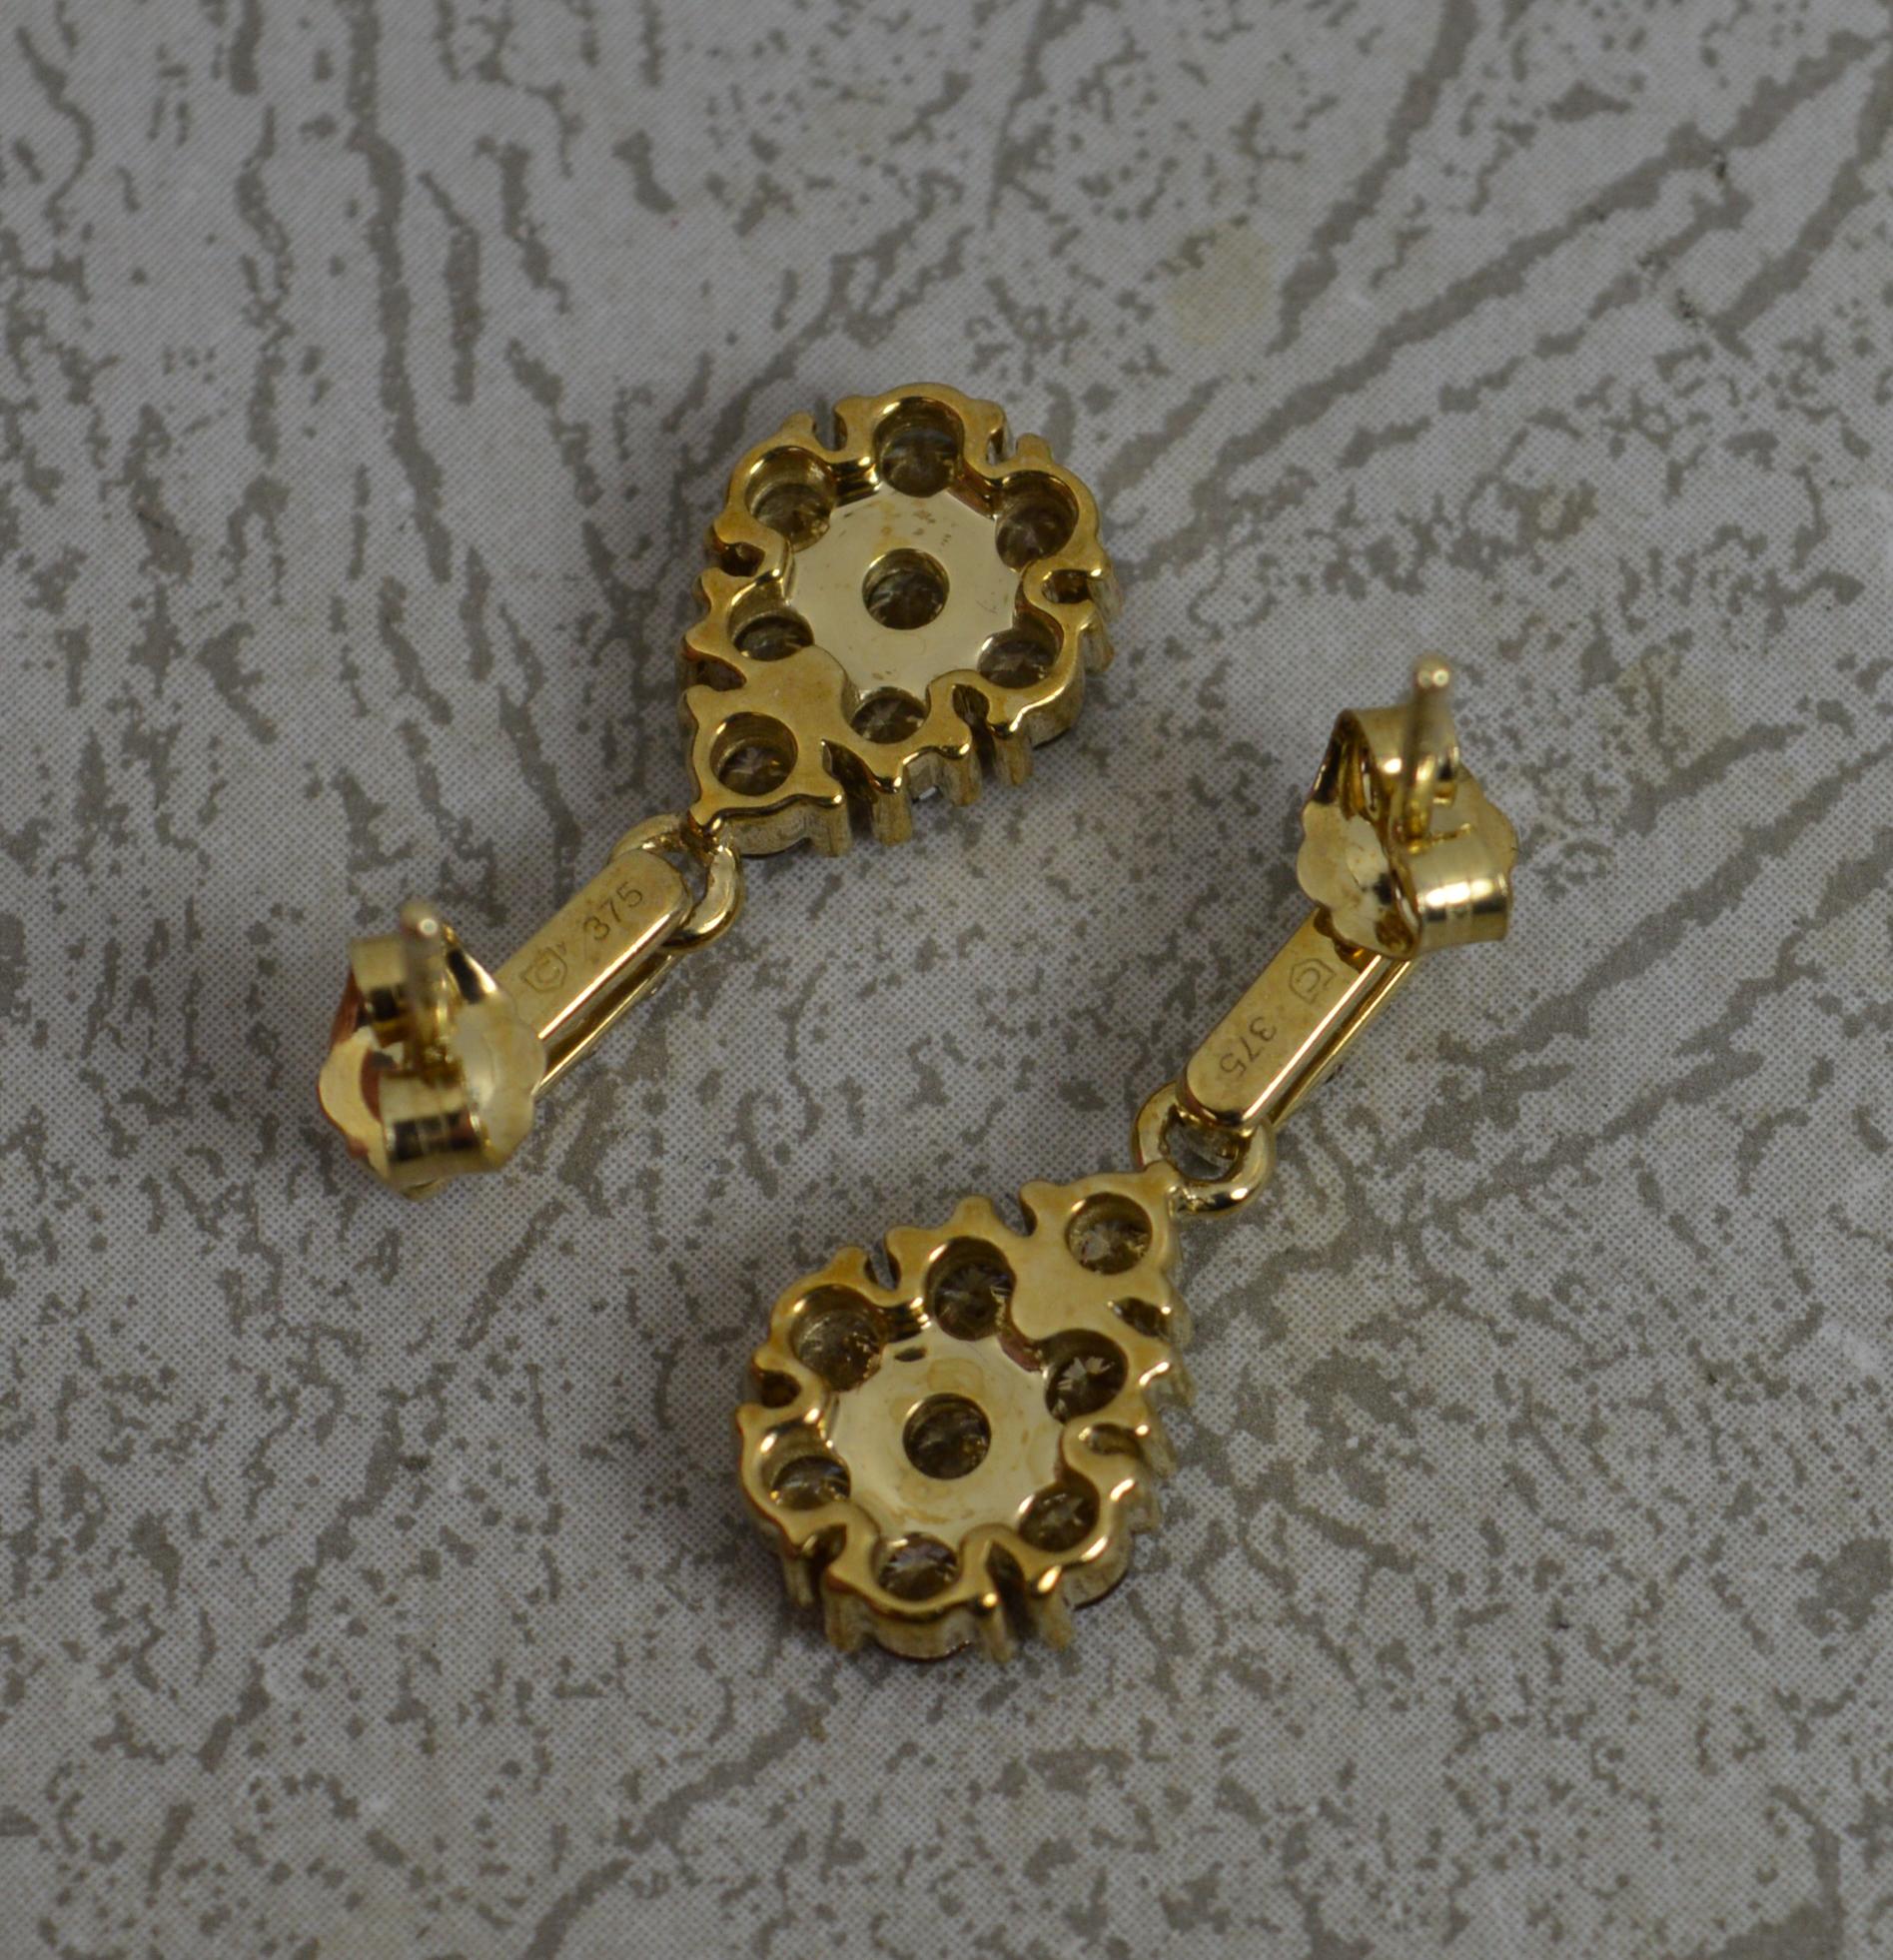 A fine pair of drop dangle earrings.
Solid 9 carat yellow gold example.
Set with round brilliant cut natural diamonds, champagne colour, 1.55 carats total.
3.3 grams. 20mm long drop. 8.5mm wide.
Condition ; Excellent. Clean stones. Crisp design.